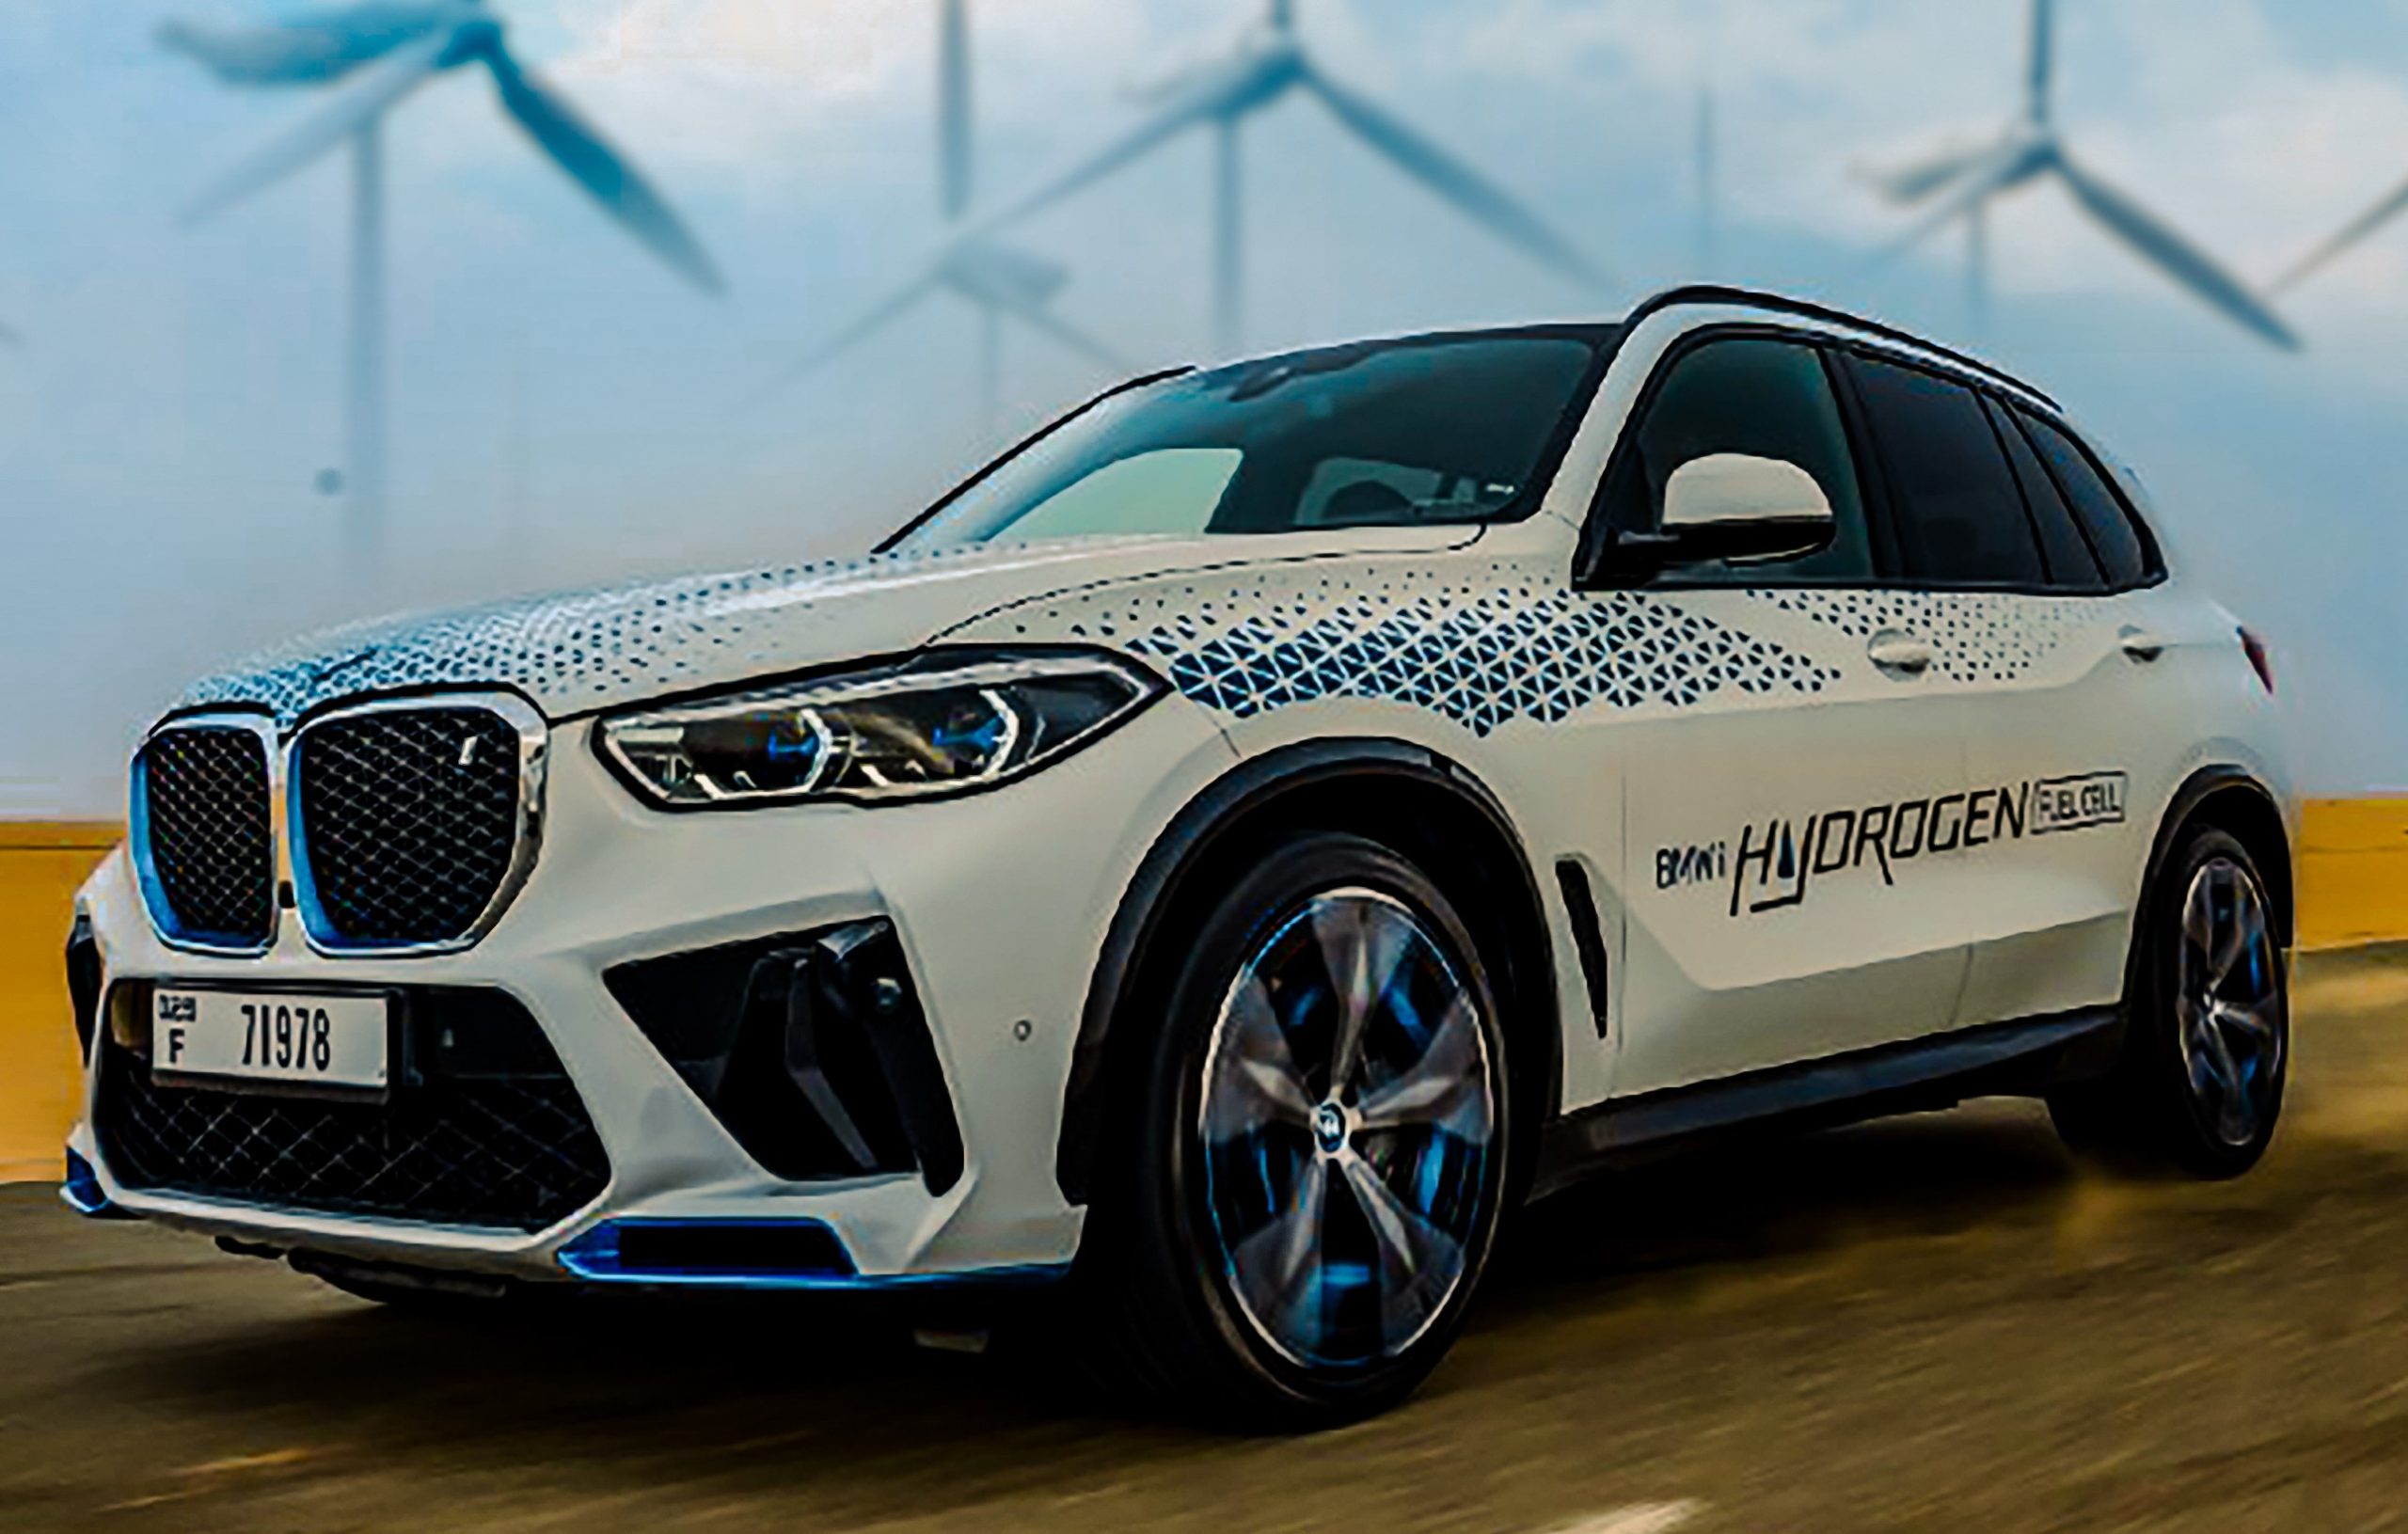 BMW bets big on Africa's green hydrogen industry with SA fuel cell test vehicle